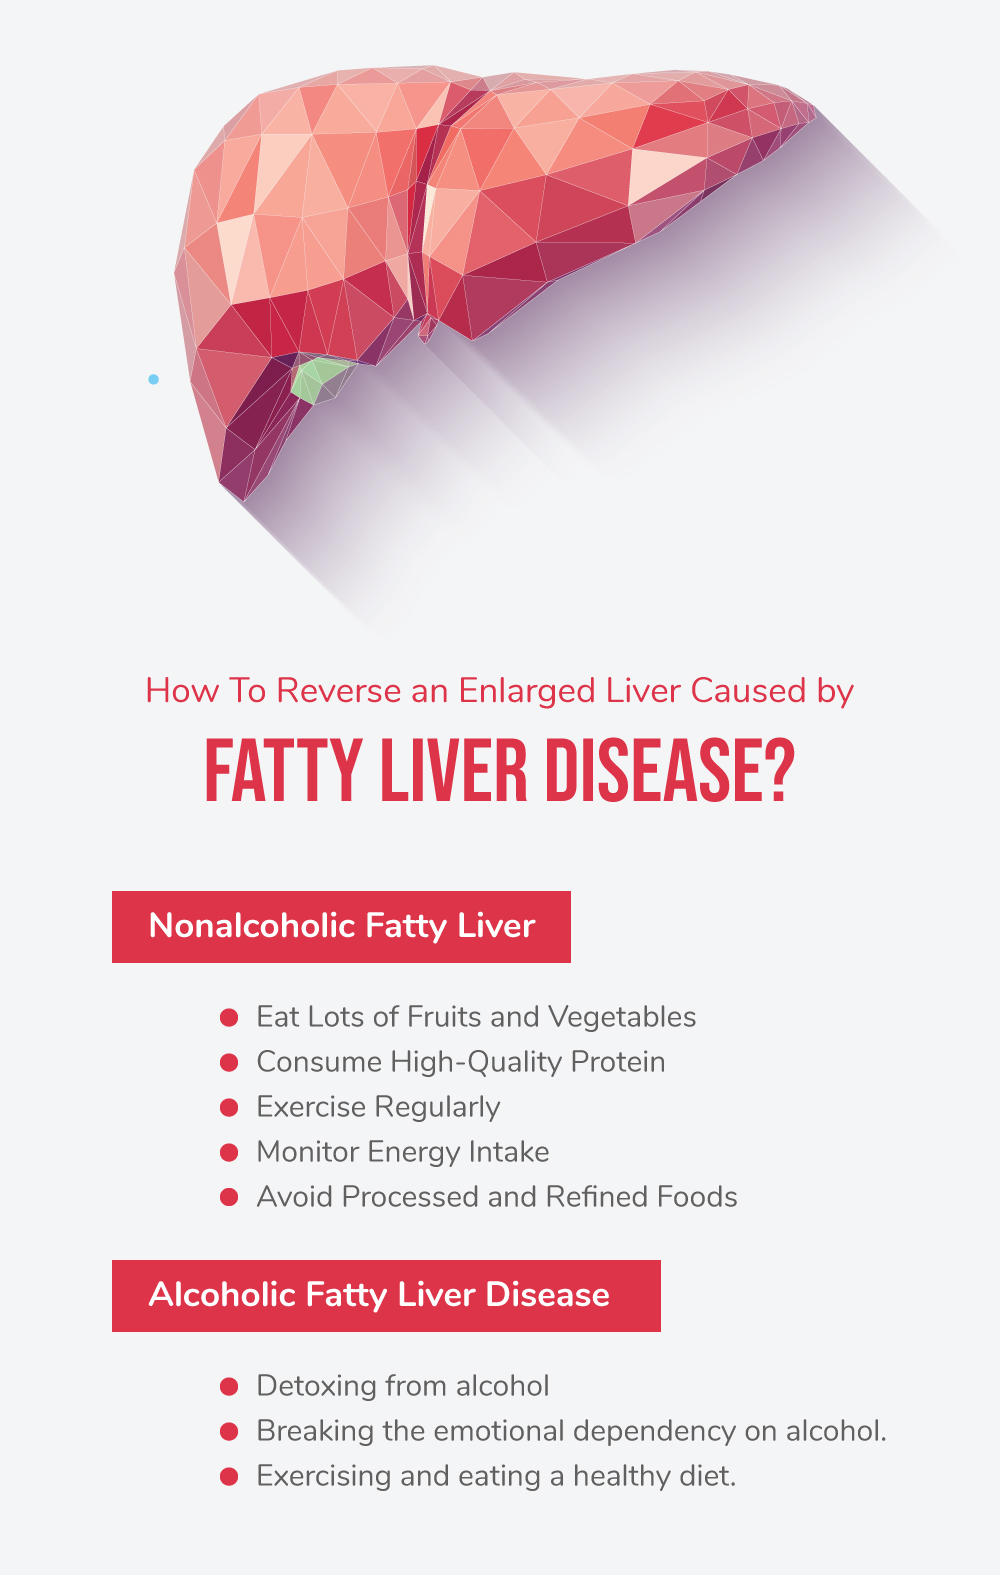 How To Reverse an Enlarged Liver Caused by Fatty Liver Disease?